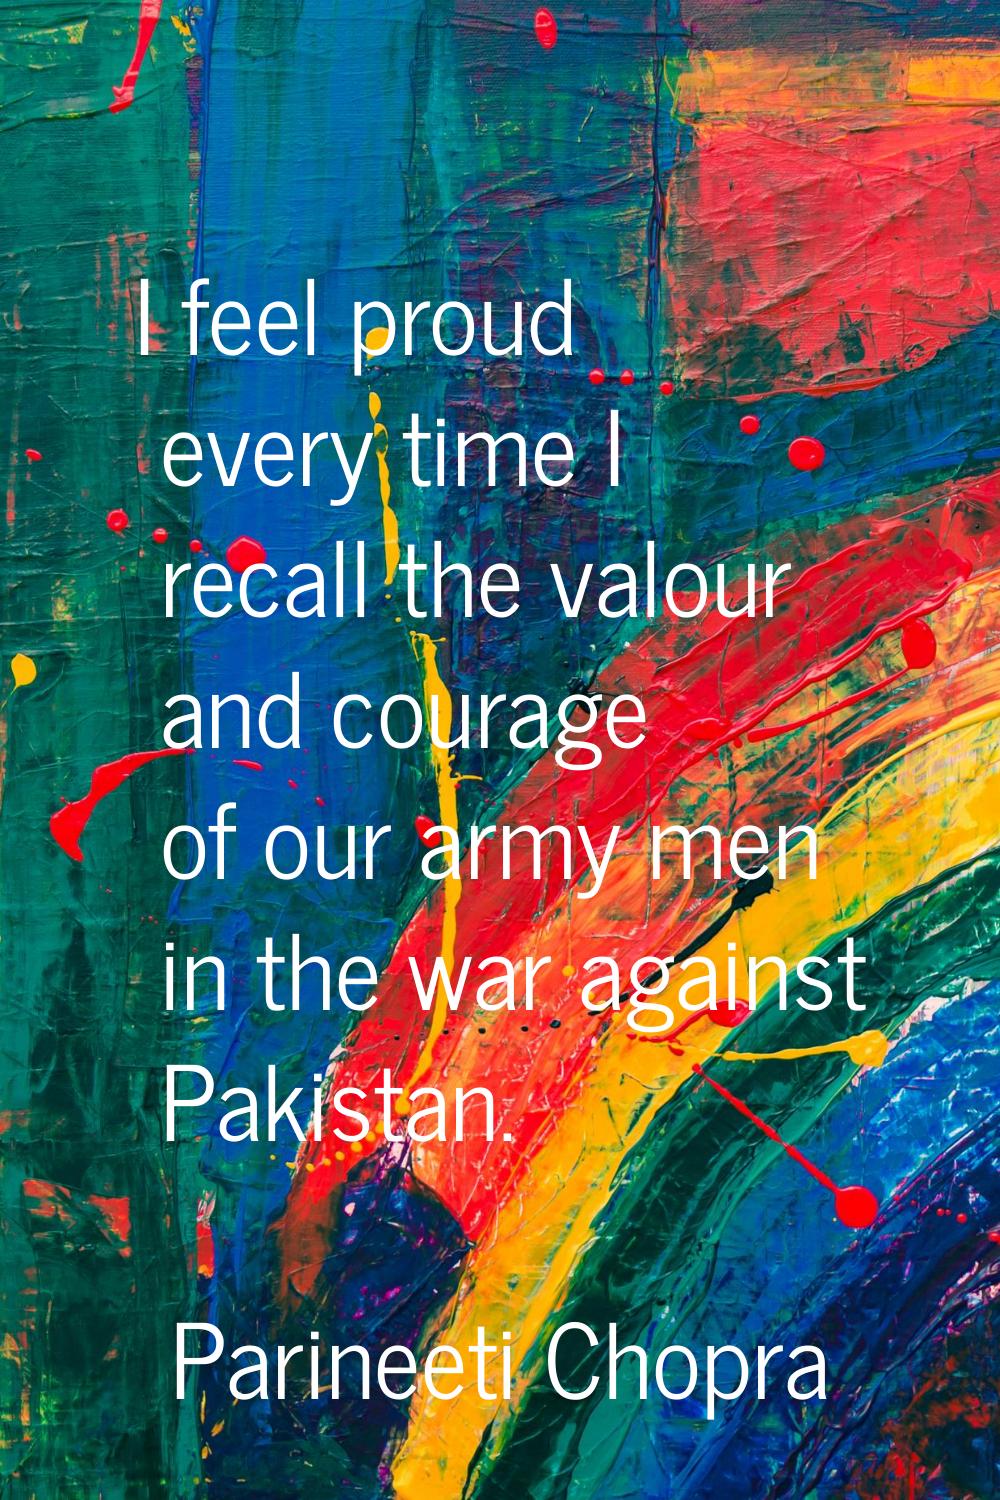 I feel proud every time I recall the valour and courage of our army men in the war against Pakistan